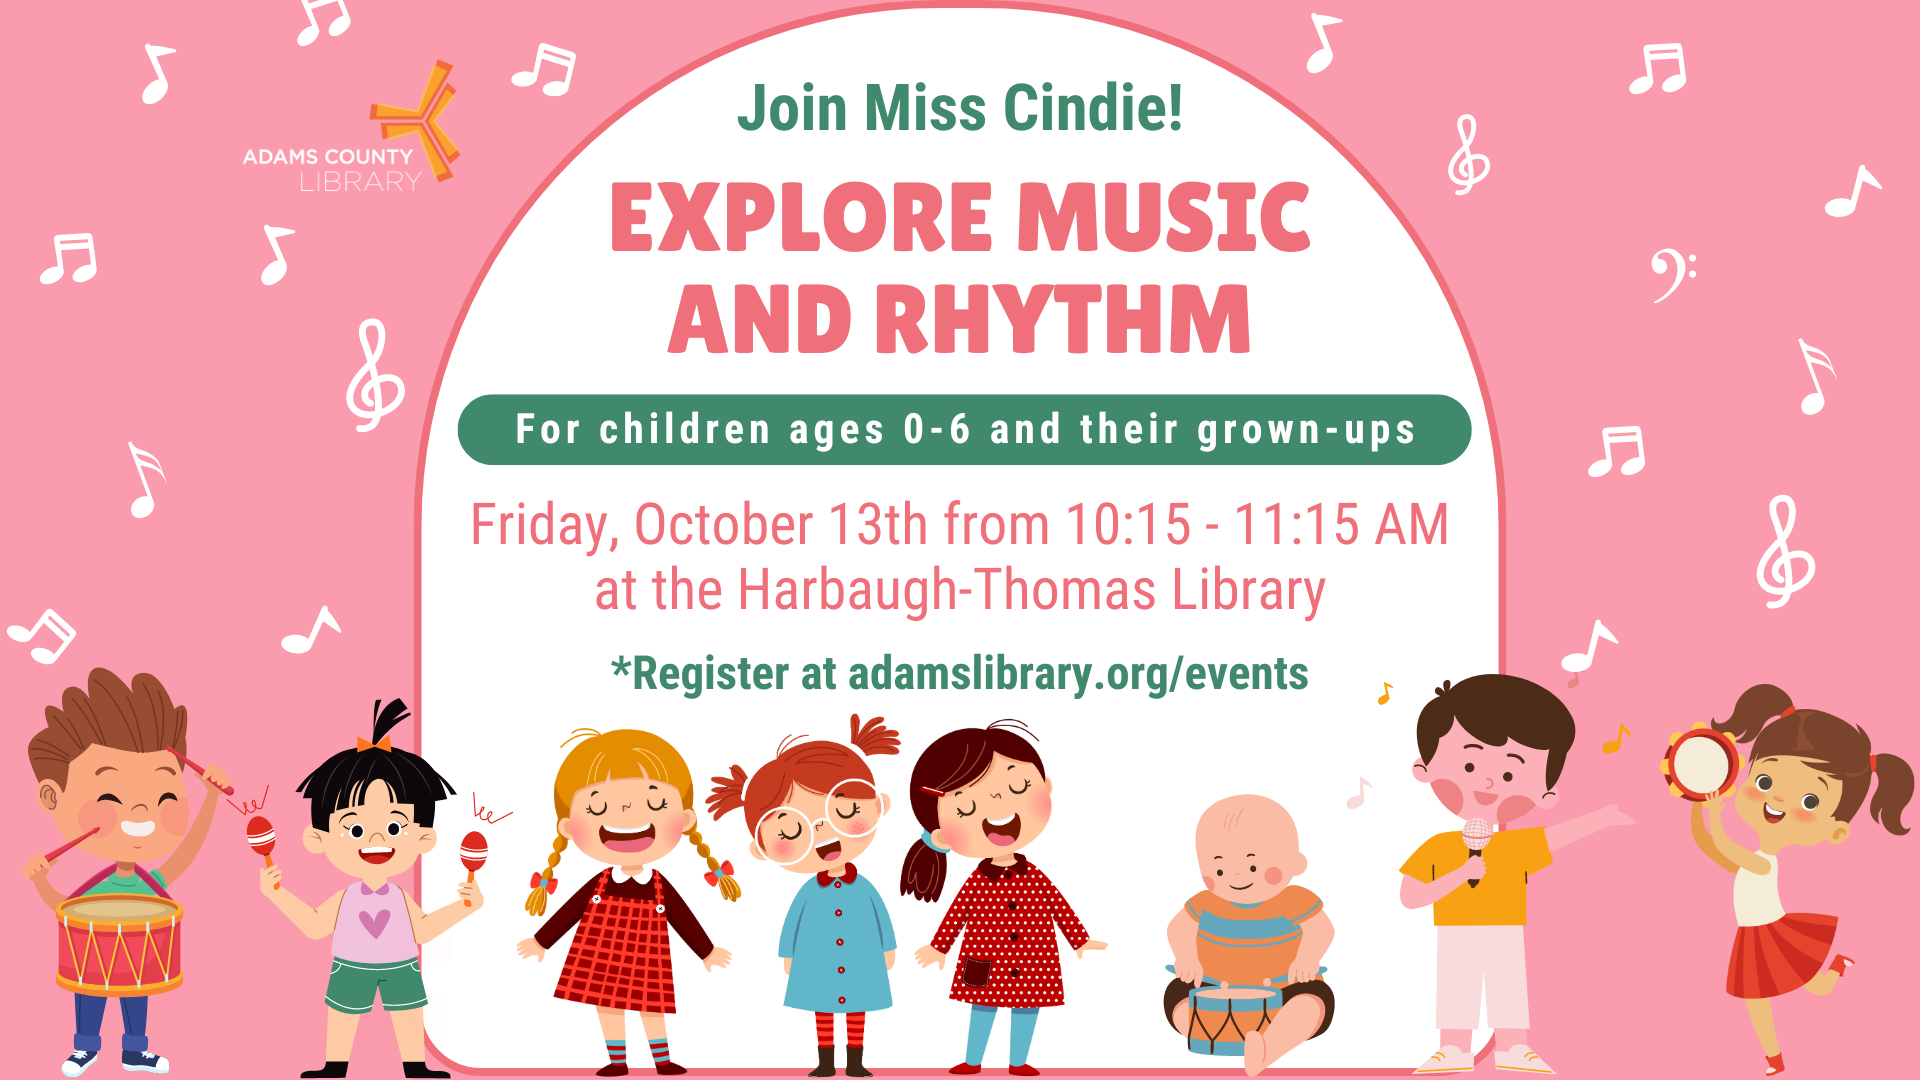 Explore Music and Rhythm - Friday, October 13th from 10:15 - 11:15 AM